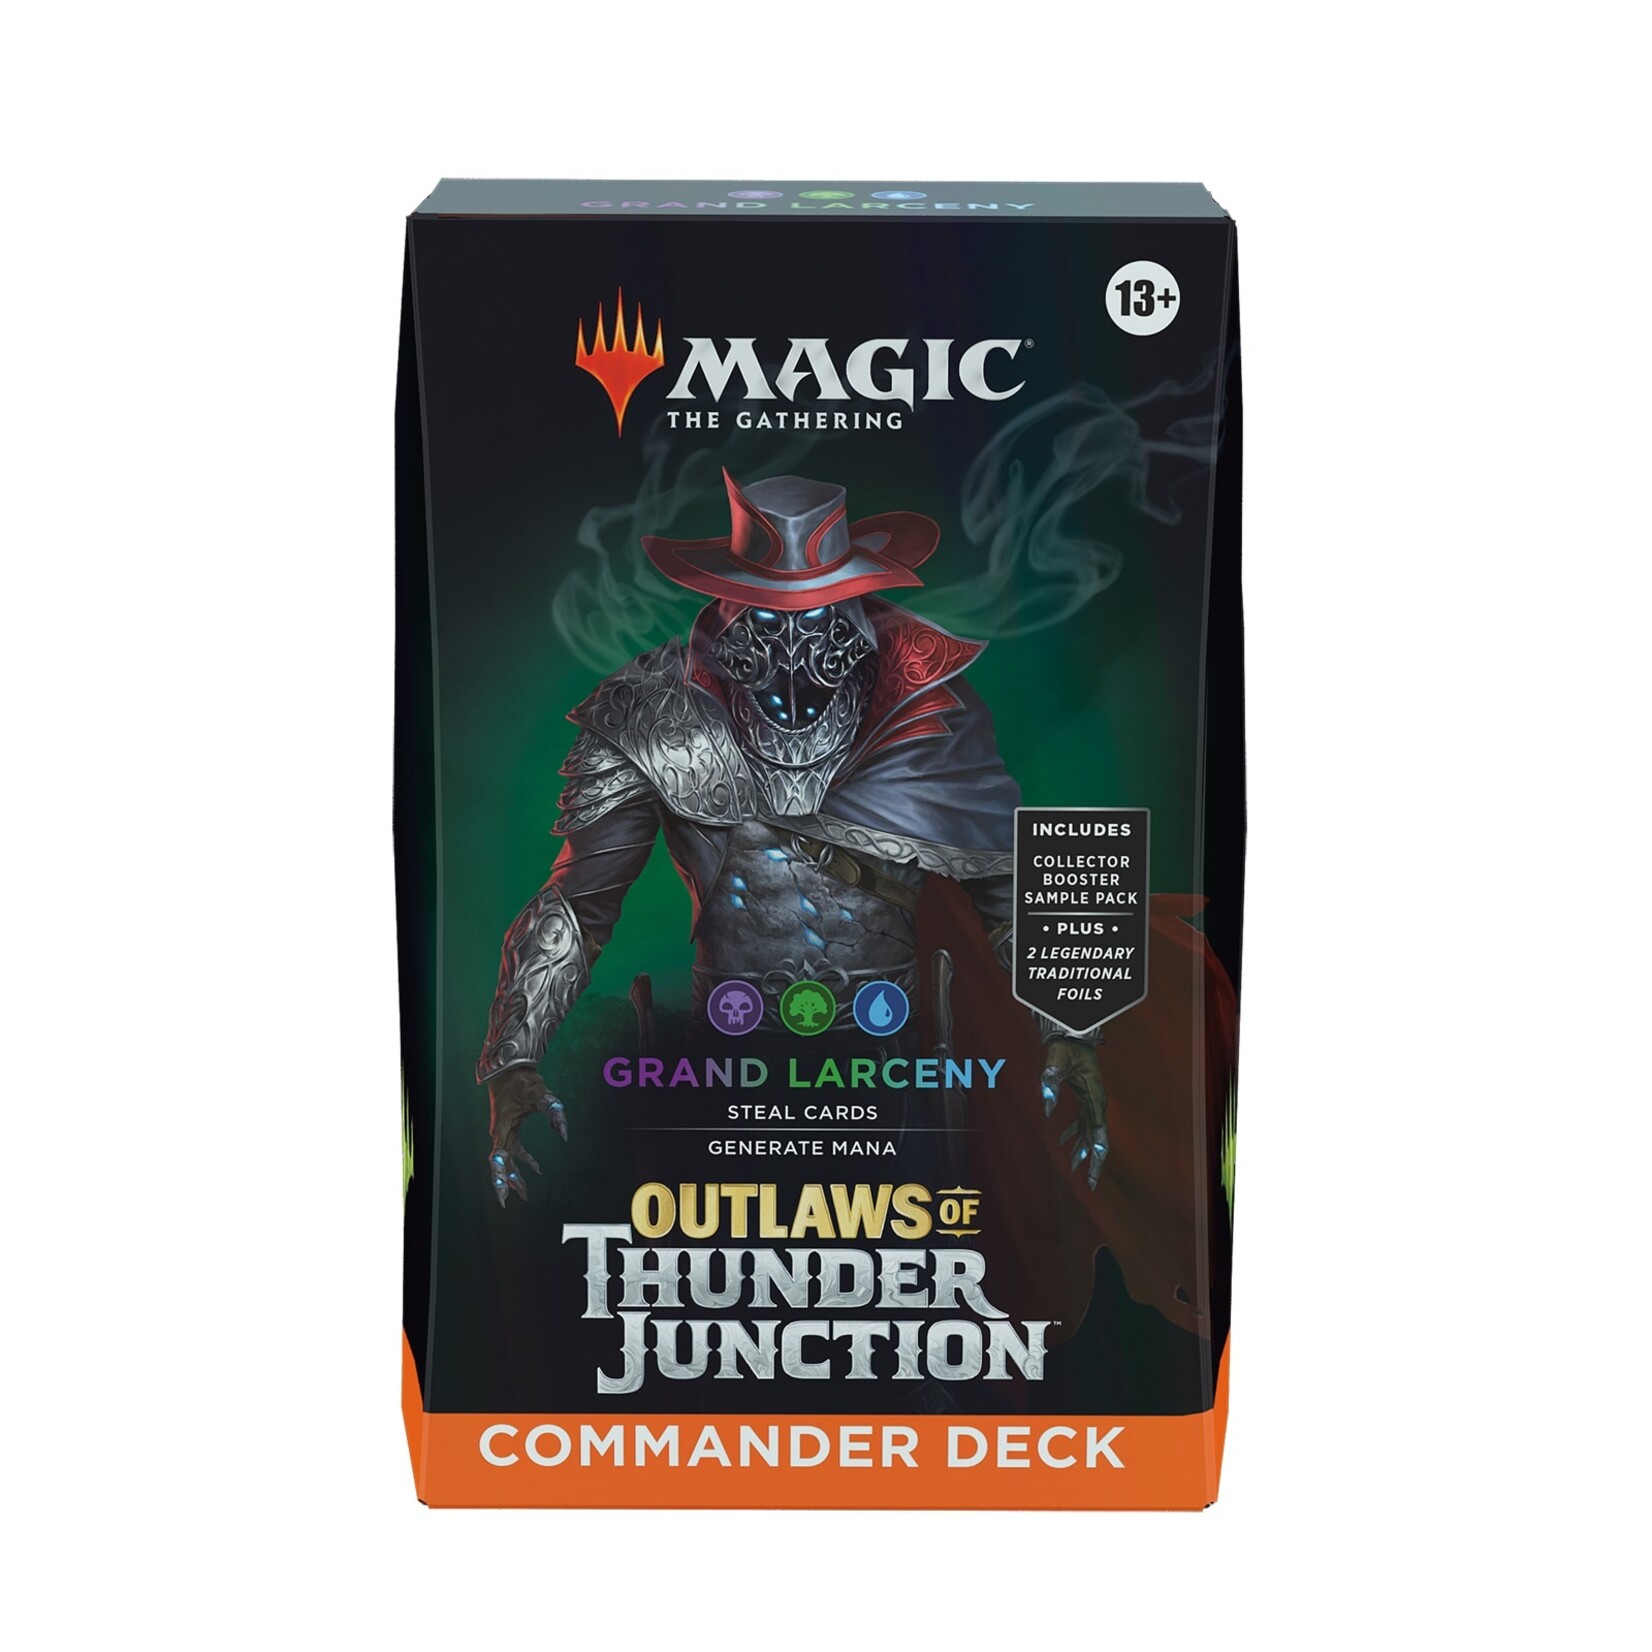 Wizard of the coast Magic the Gathering - Outlaws of Thunder Junction - Commander Deck - Grand Larceny